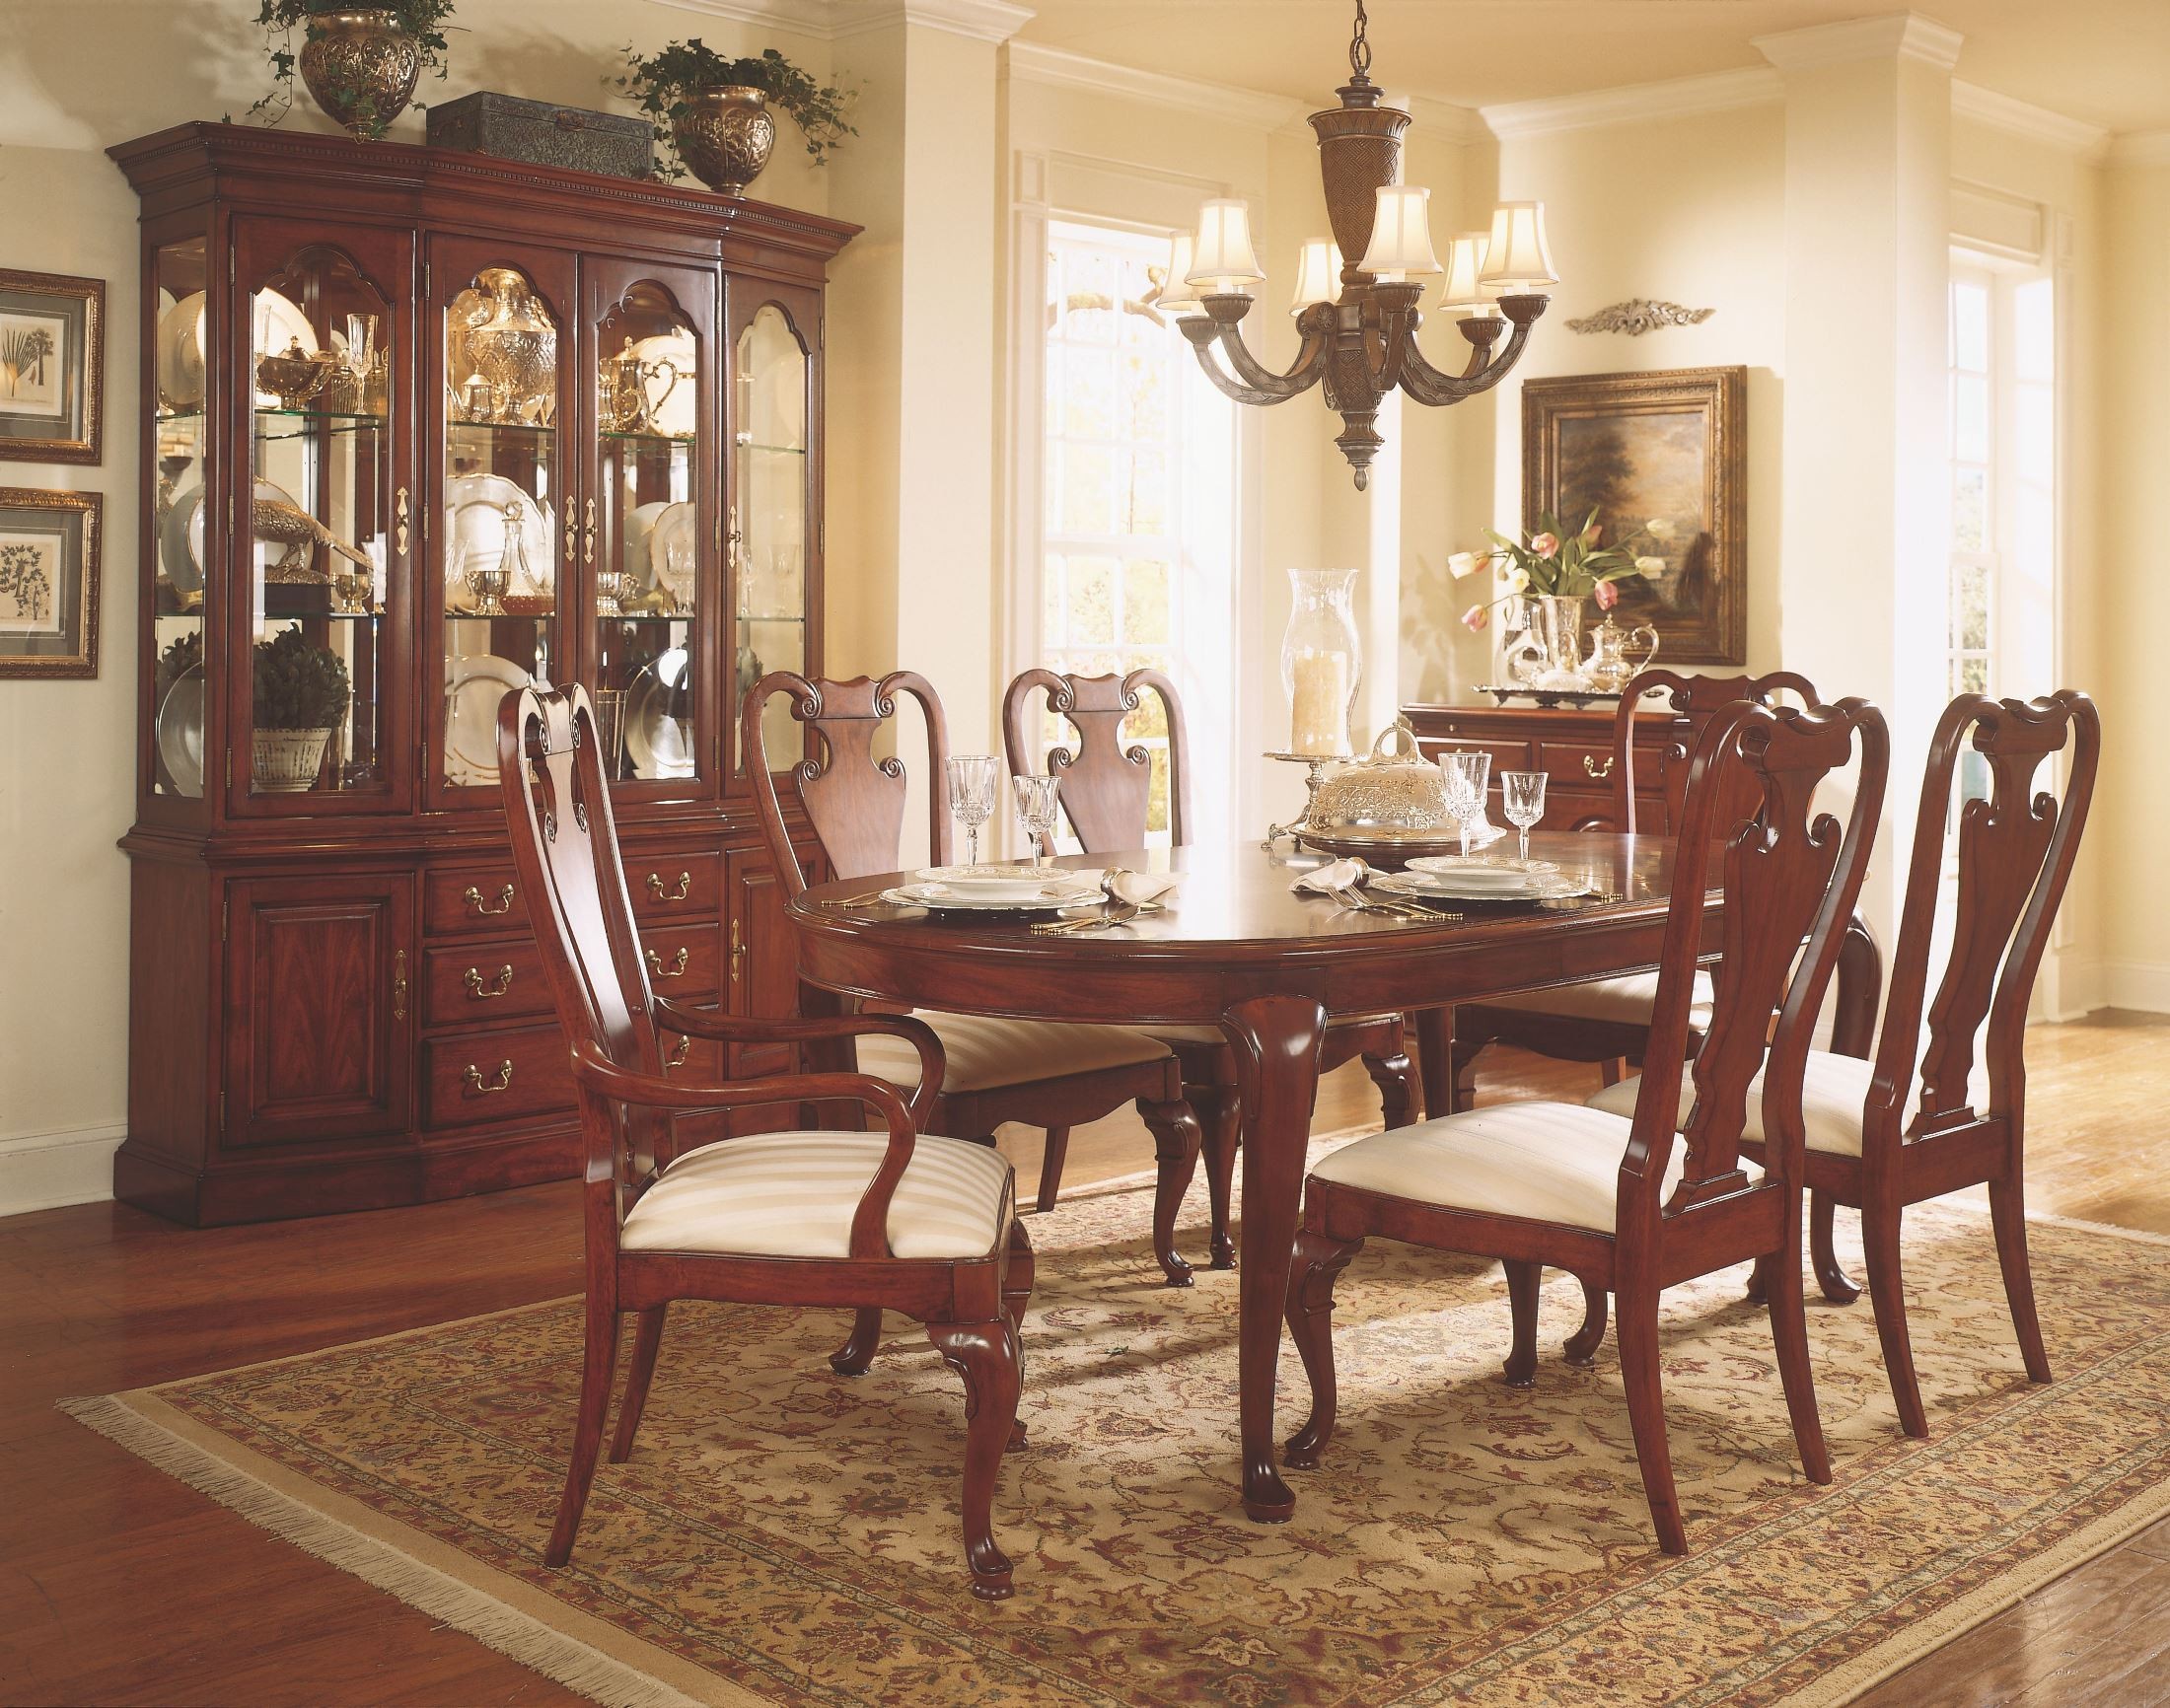 Harden Solid Cherry Dining Room Set